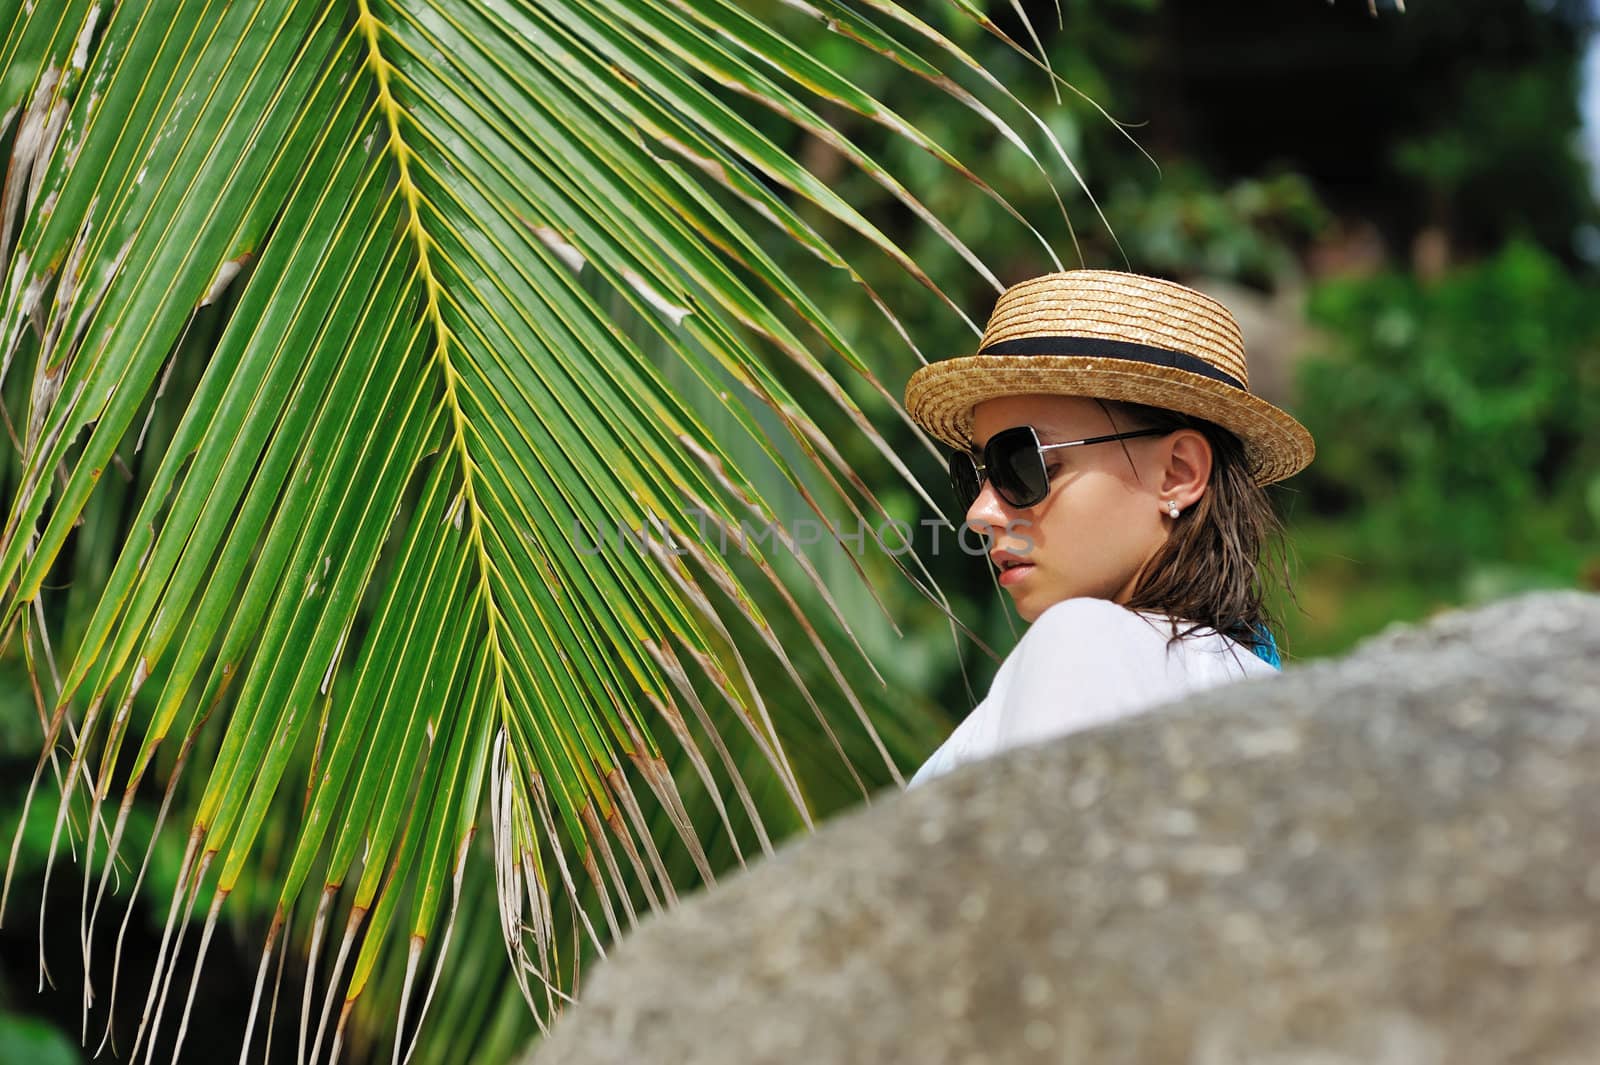 Woman in sunglasses near palm tree by haveseen